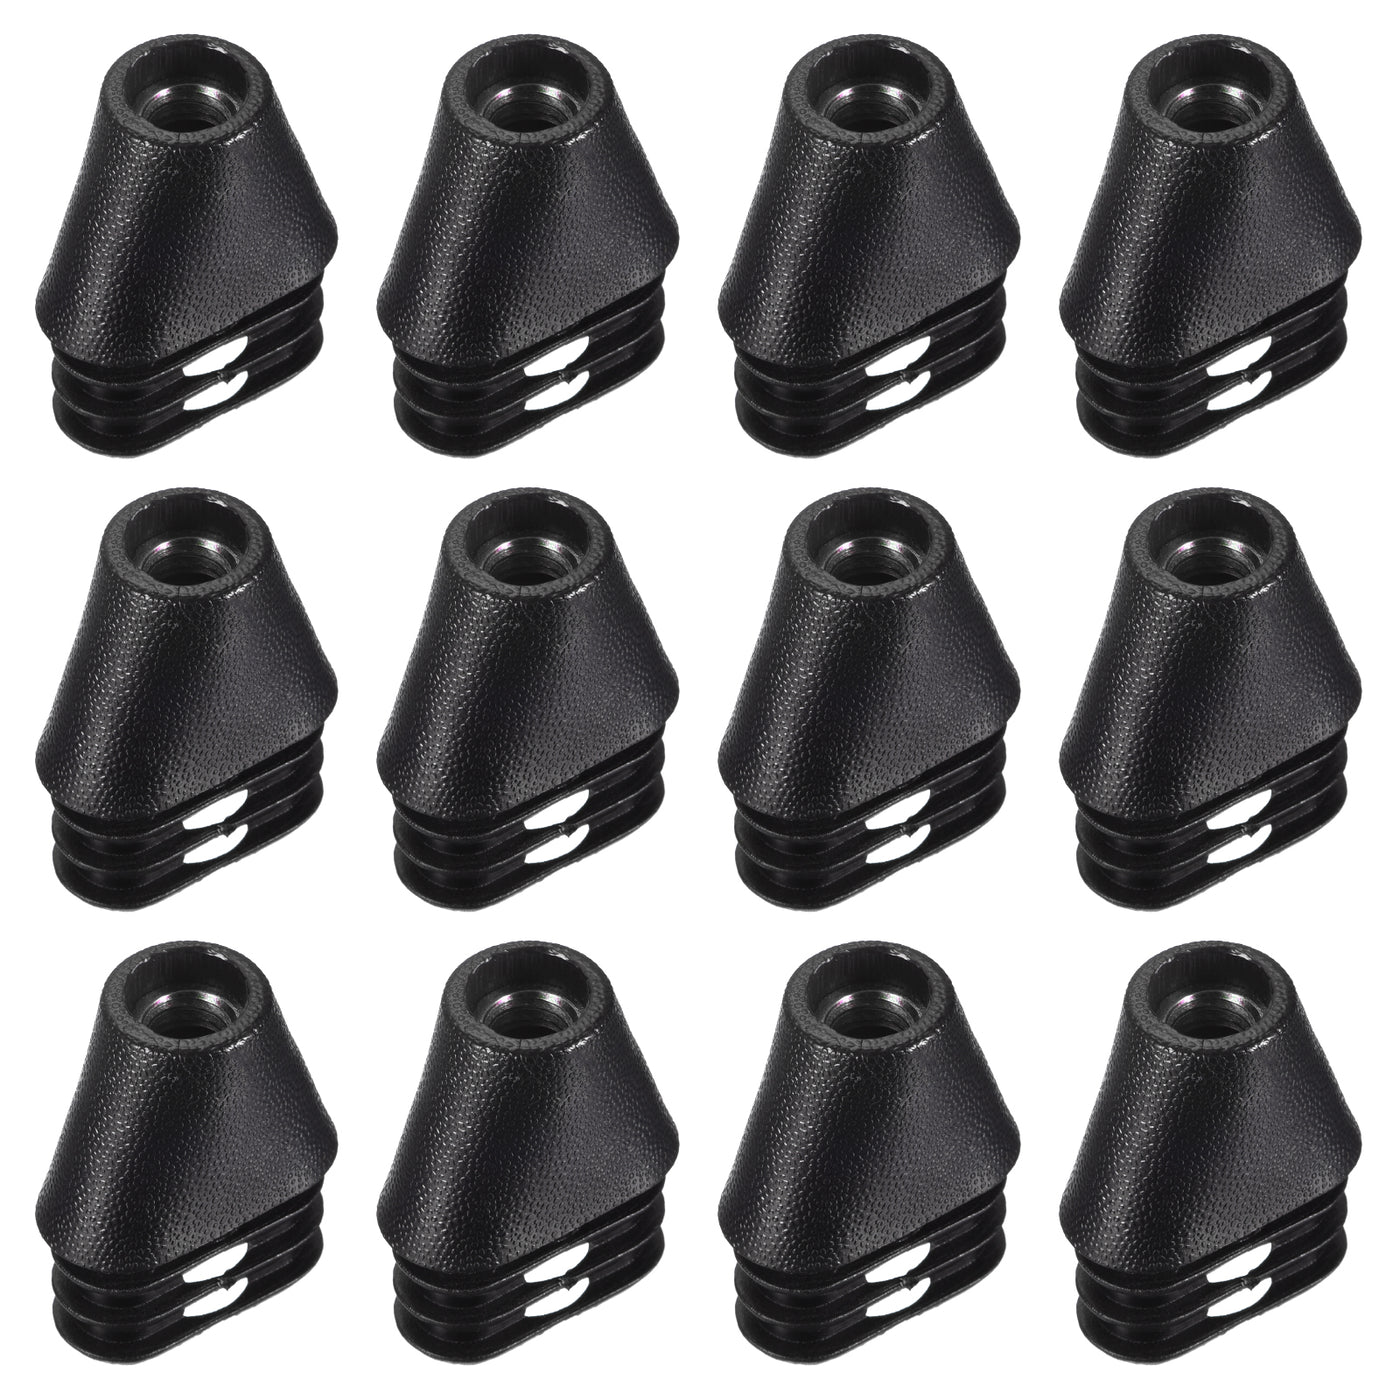 uxcell Uxcell 12Pcs 1.18"x0.59" Caster Insert with Thread, M8 Thread for Furniture